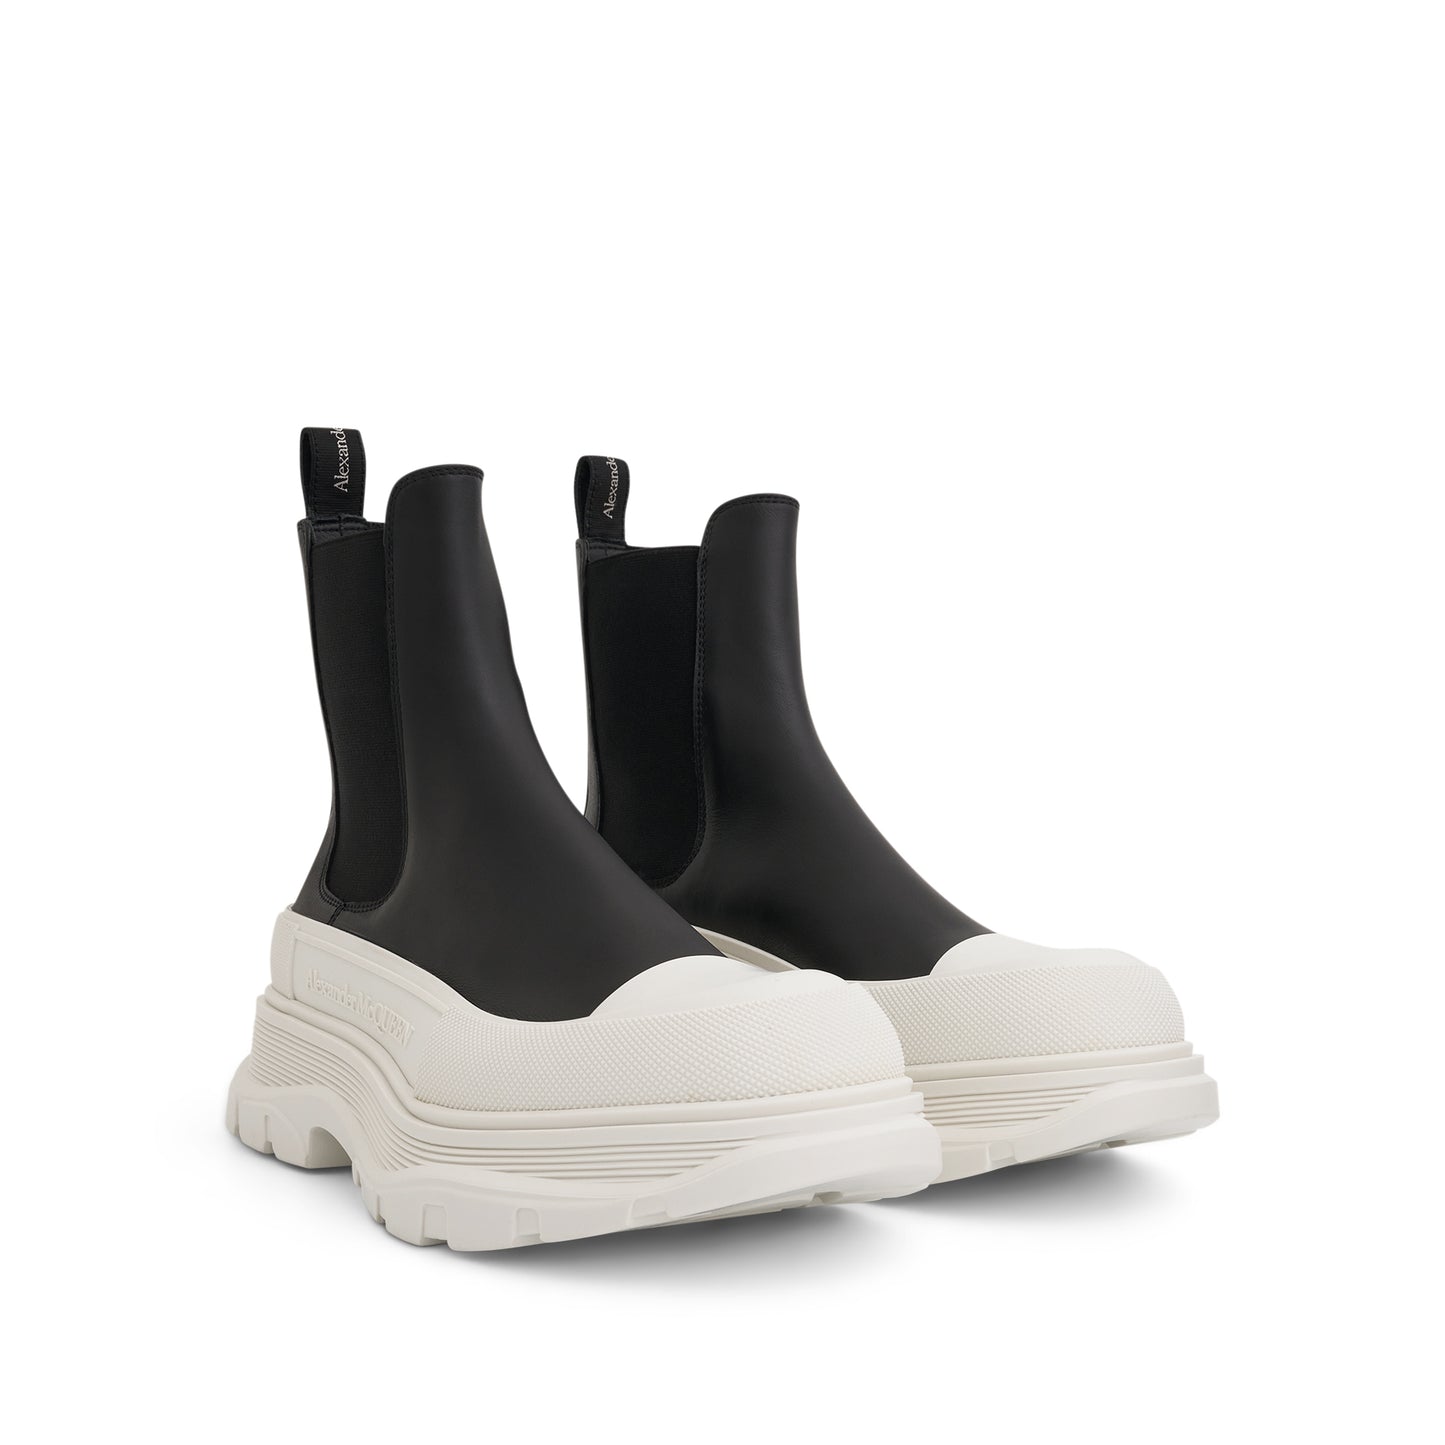 Tread Slick Ankle Boots in Black/White